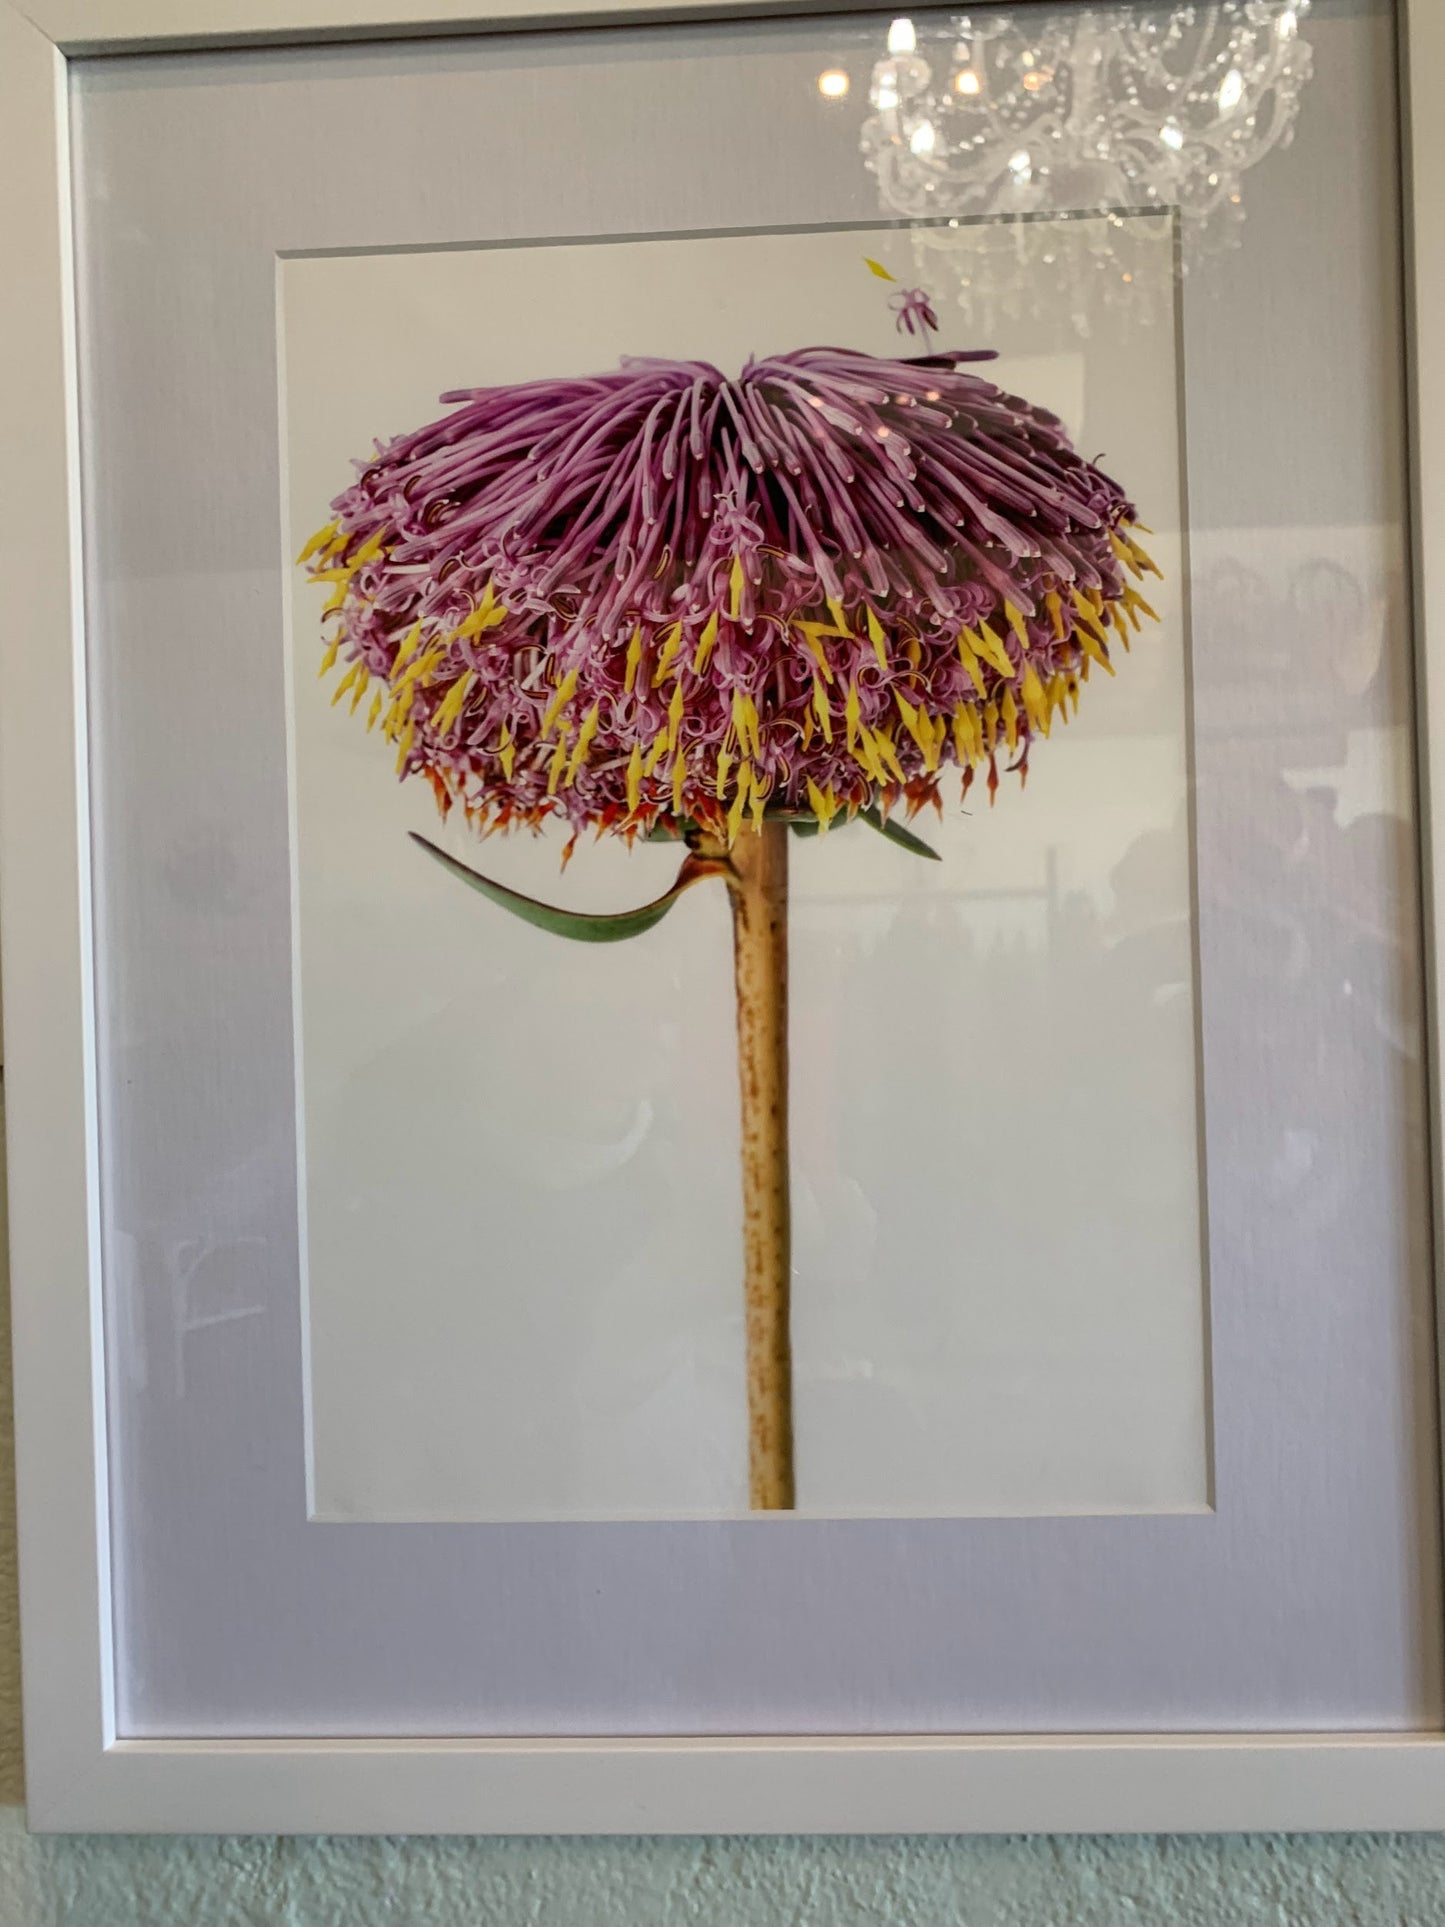 Floragraphica Isopogon Cuneatus  - A4 Still Life Framed Photograph